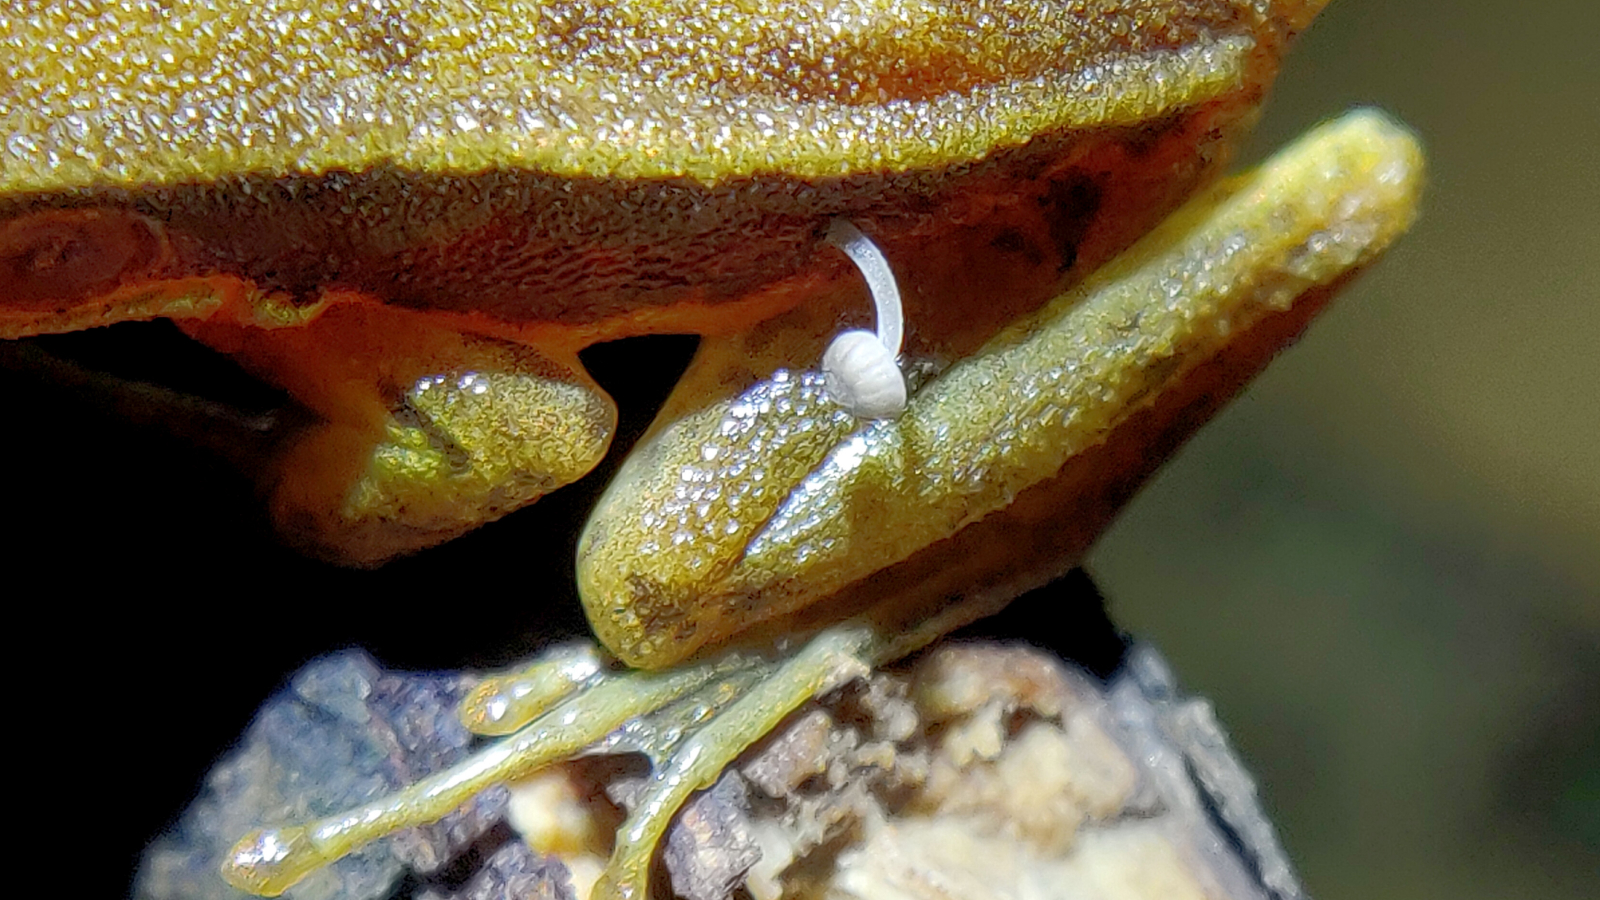 Another close-up of the mushroom with the leg of the frog in view.